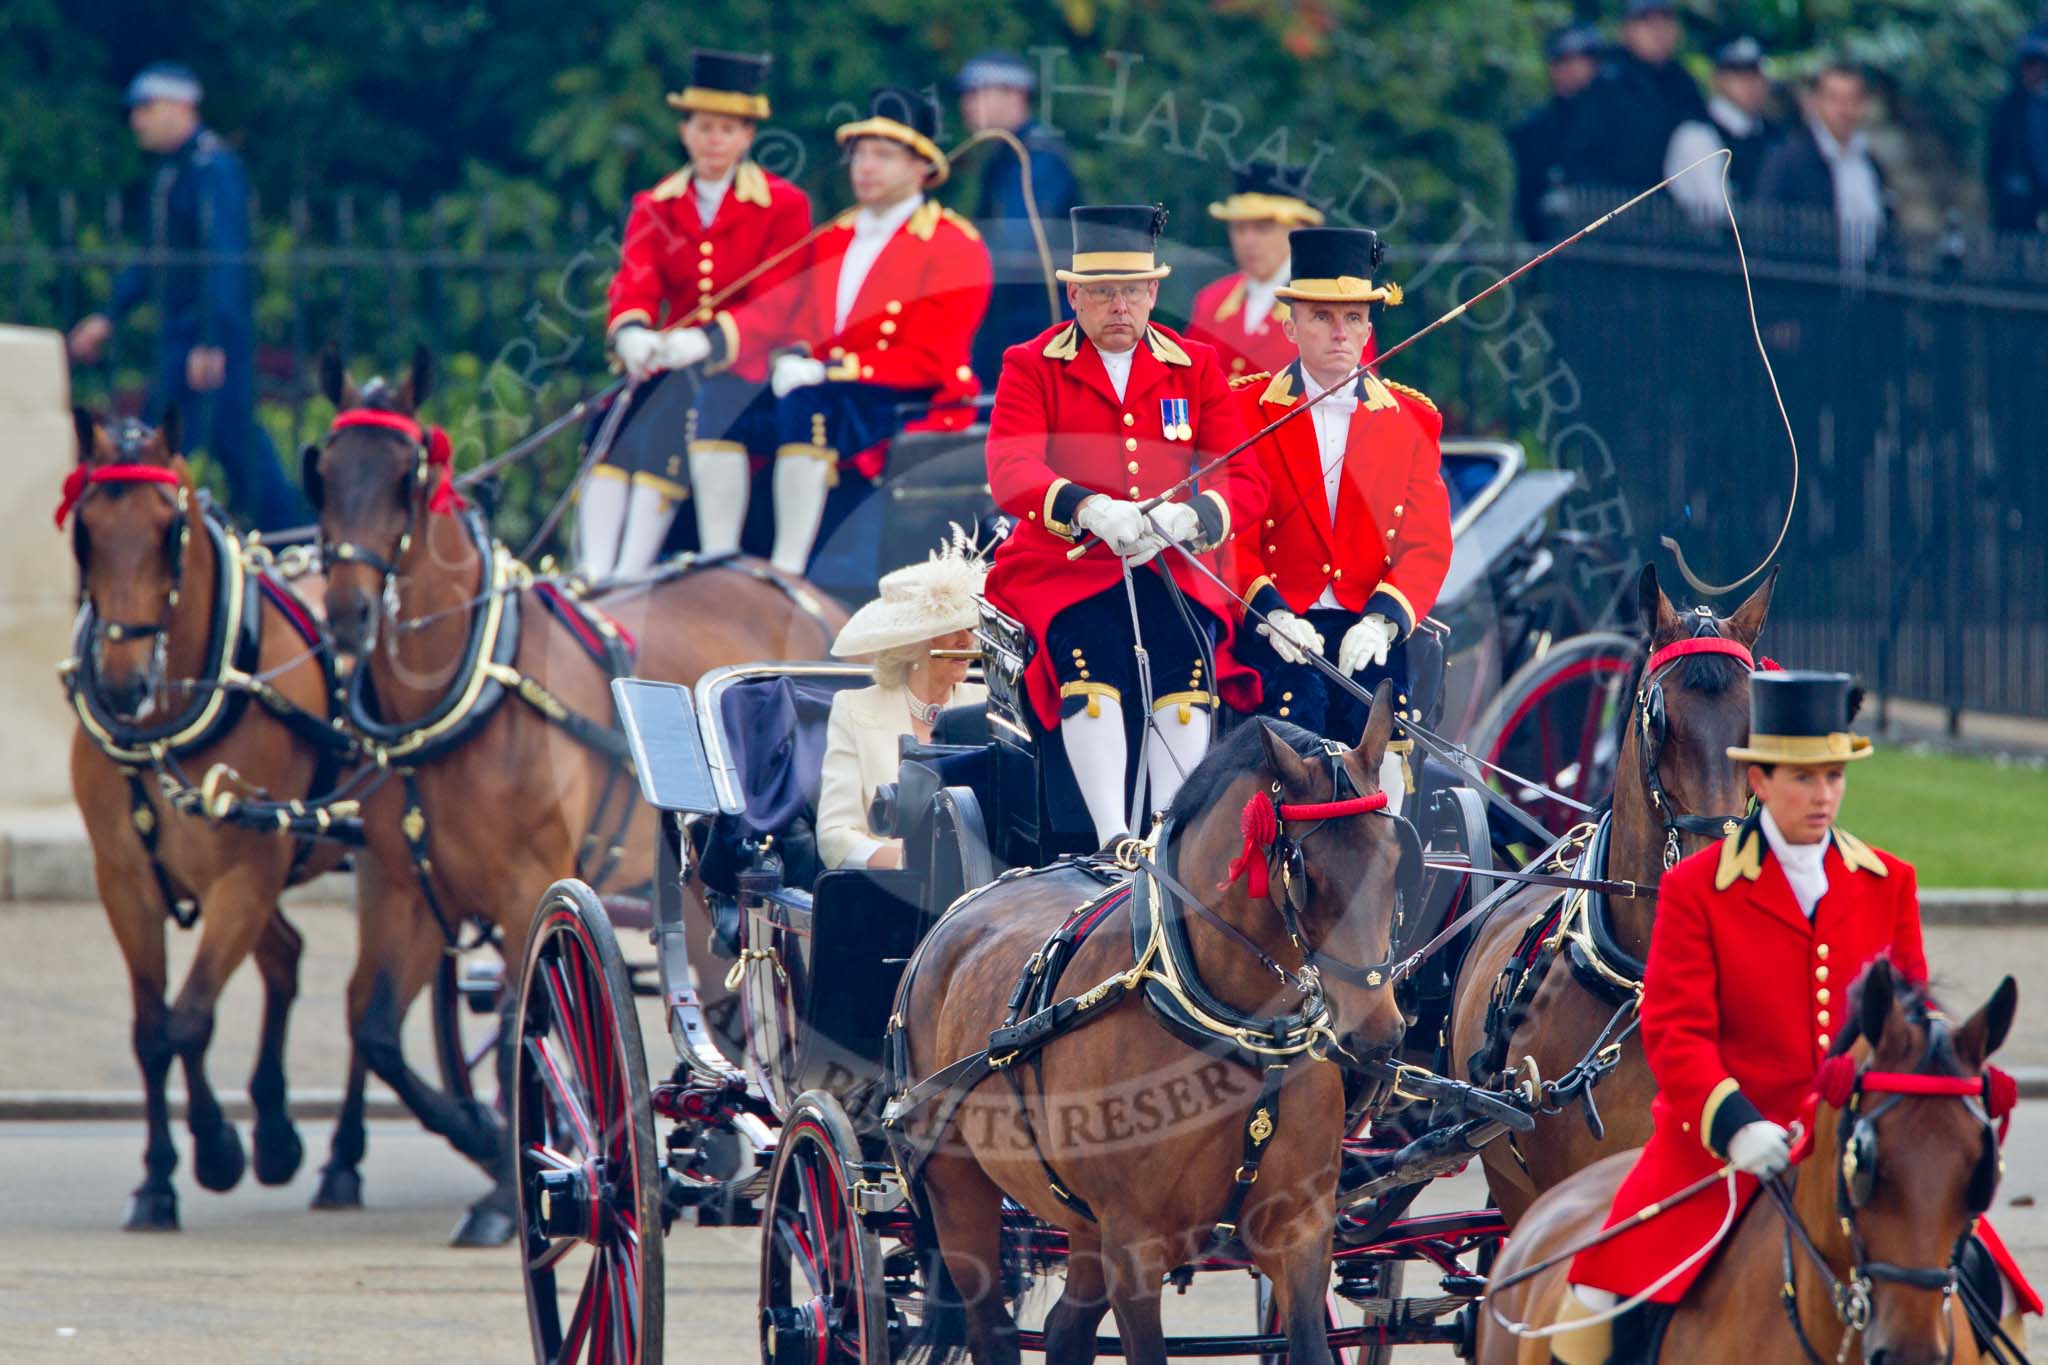 Trooping the Colour 2011: The first two barouche carriages arriving at Horse Guards Parade, in the first, just visible, HRH The Duchess of Cornwall, and, out of sight, HRH the Duchess of Cambridge, HRH Prince Henry of Wales (Prince Harry), and HRH Prince Andrew, the Duke of York..
Horse Guards Parade, Westminster,
London SW1,
Greater London,
United Kingdom,
on 11 June 2011 at 10:49, image #83